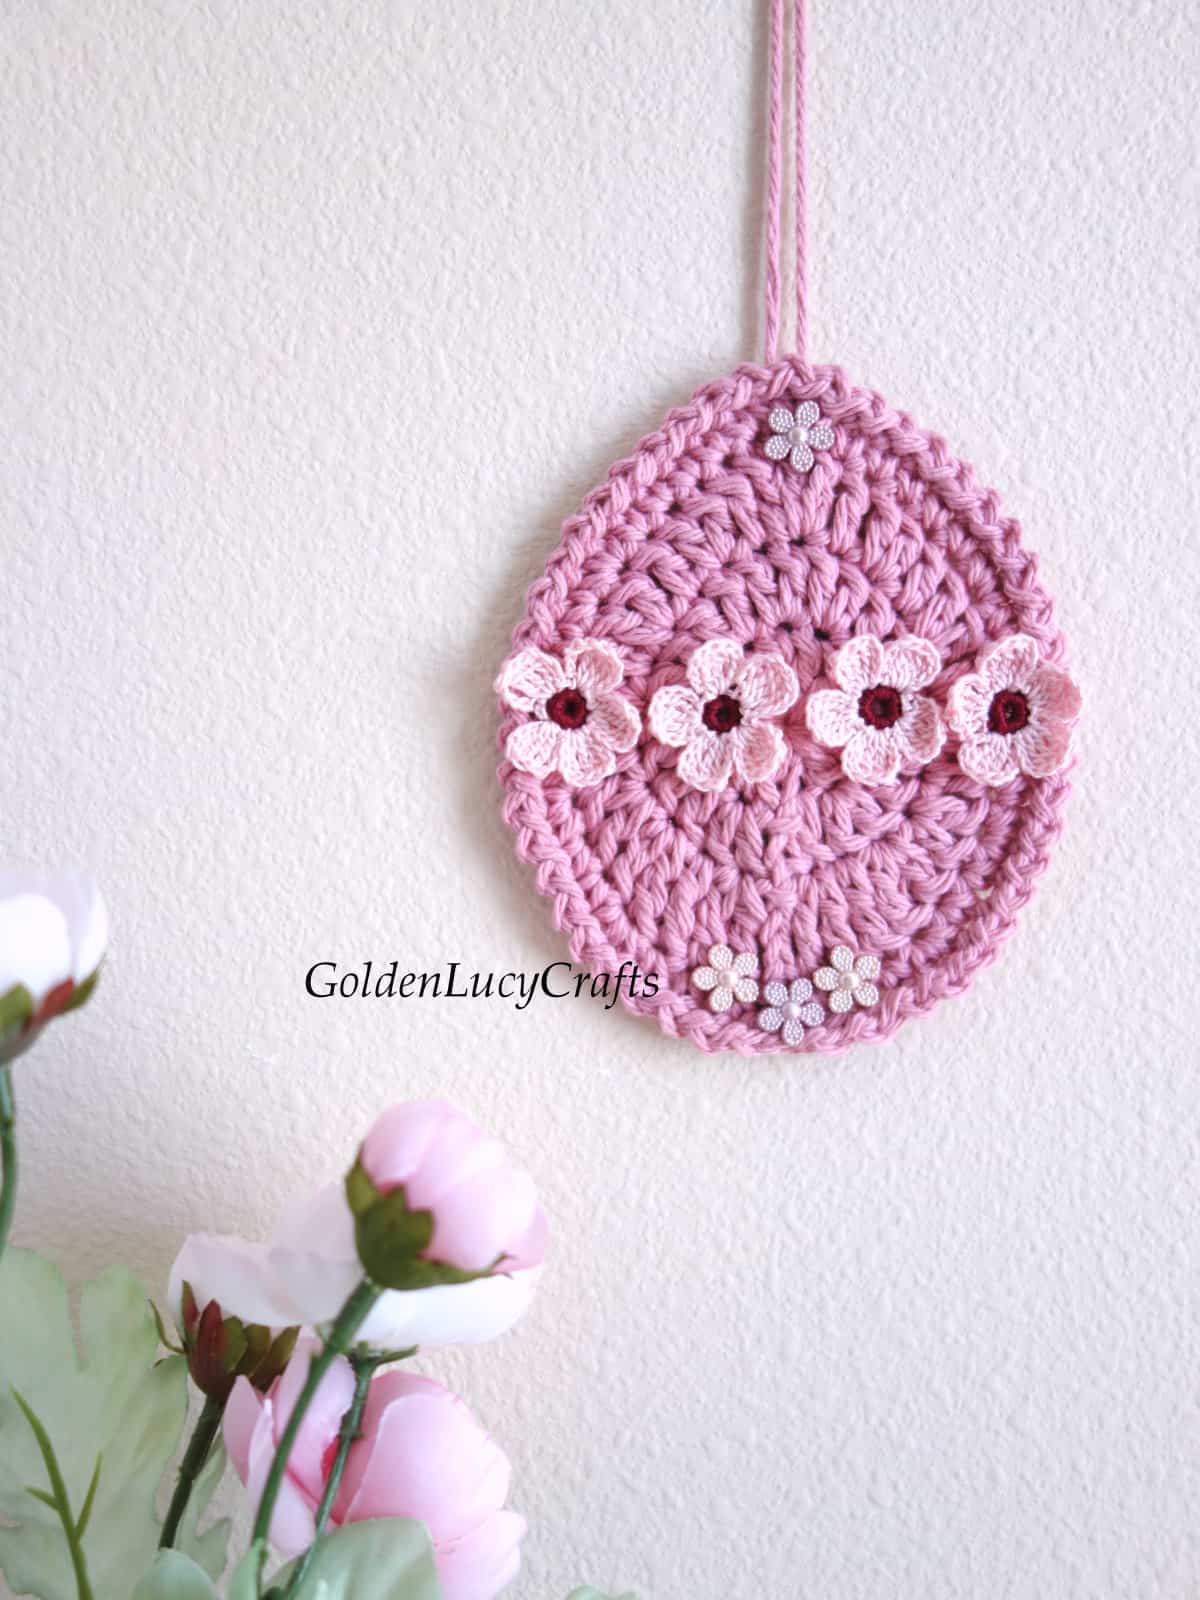 Crochet Easter egg ornament hanging on the wall.